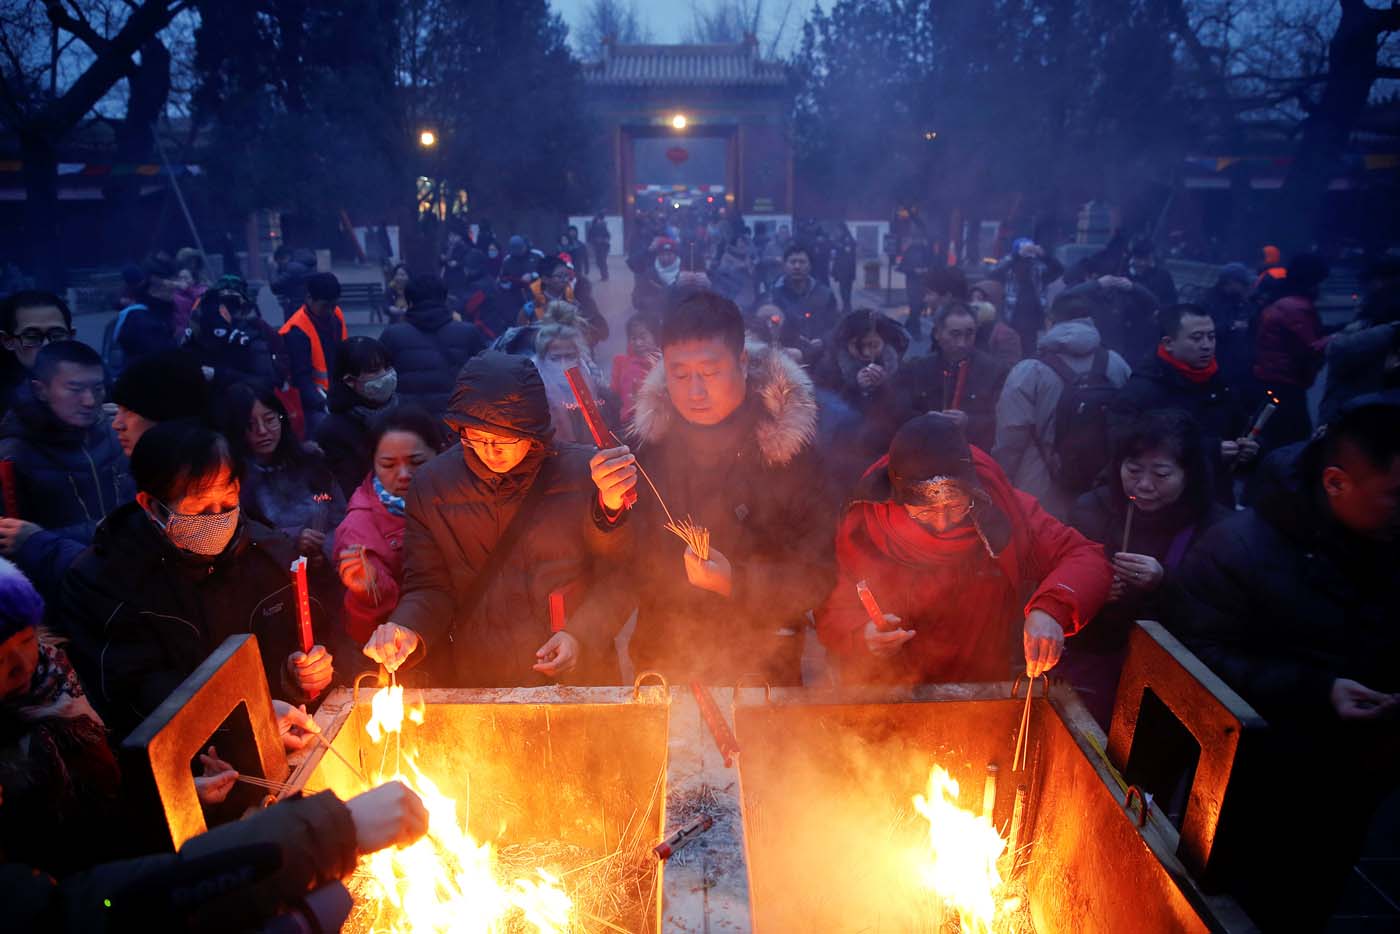 People burn incense sticks and pray for good fortune at Yonghegong Lama Temple on the first day of the Lunar New Year of the Rooster in Beijing, China January 28, 2017. REUTERS/Damir Sagolj